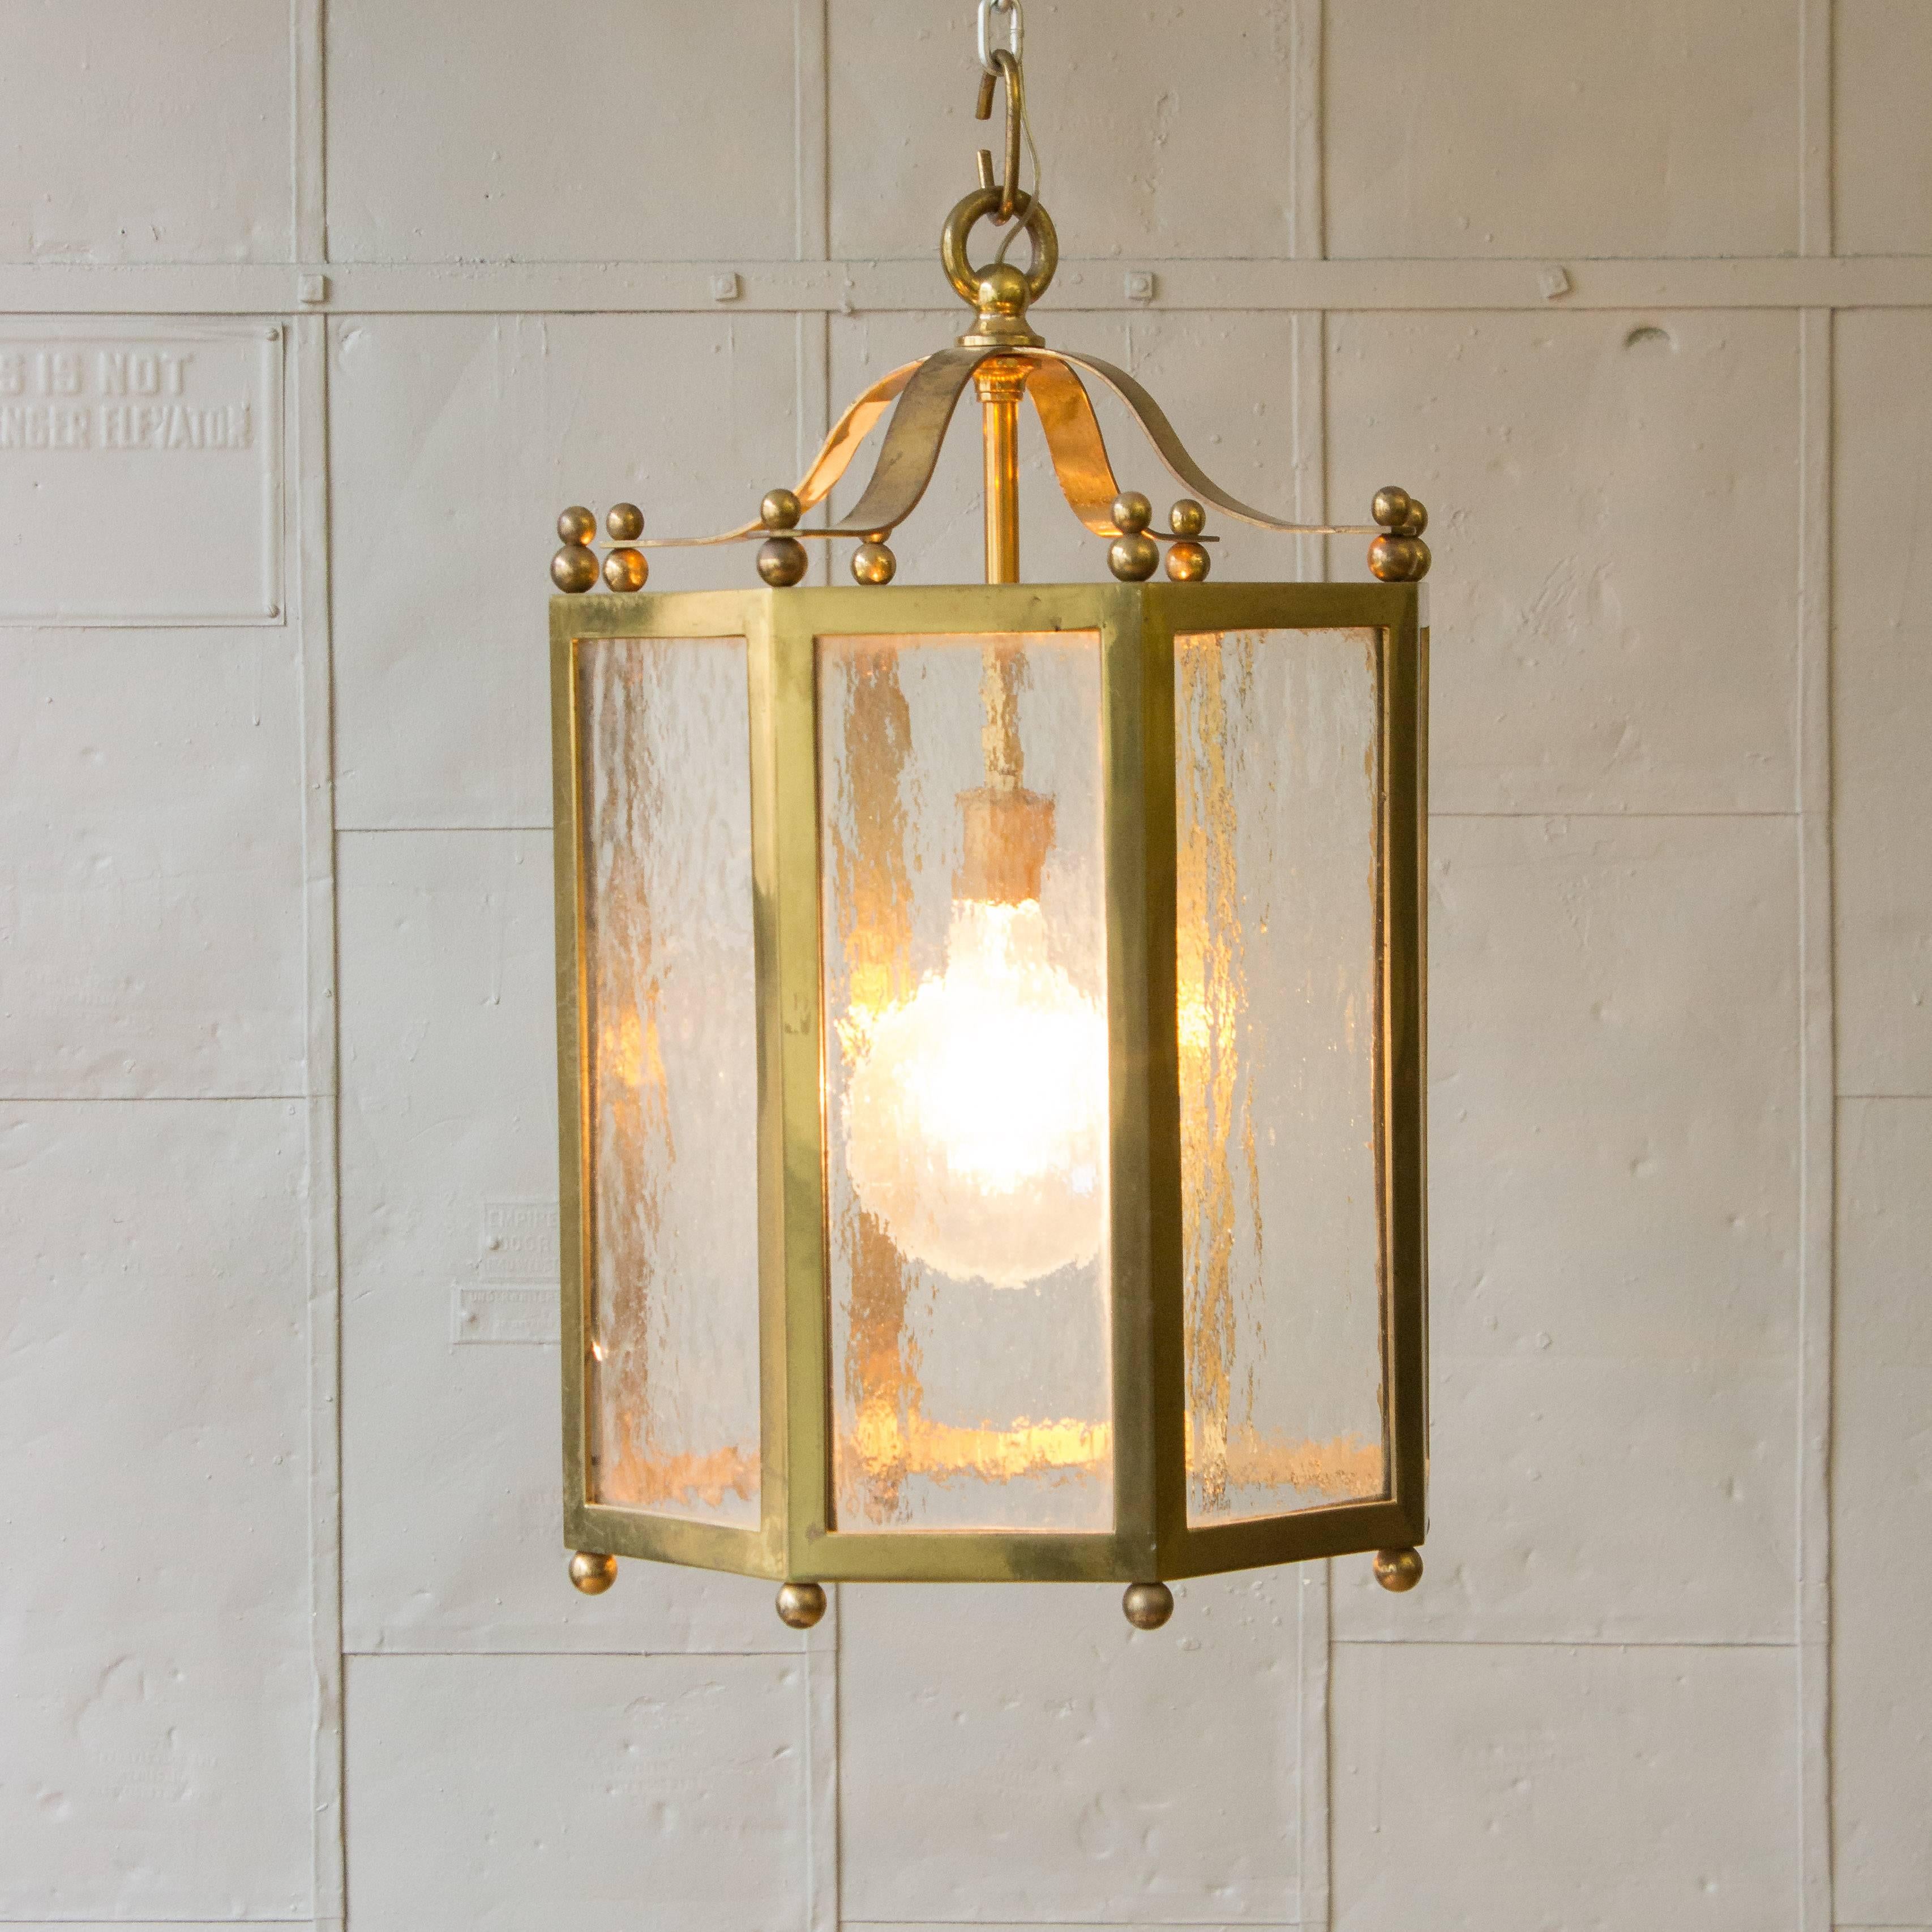 This elegant French eight sided hanging brass lantern will add a touch of sophistication to any room in your home. Boasting eight panes of textured glass set in an ornate brass structure, it provides the perfect balance of luxury and subtlety.